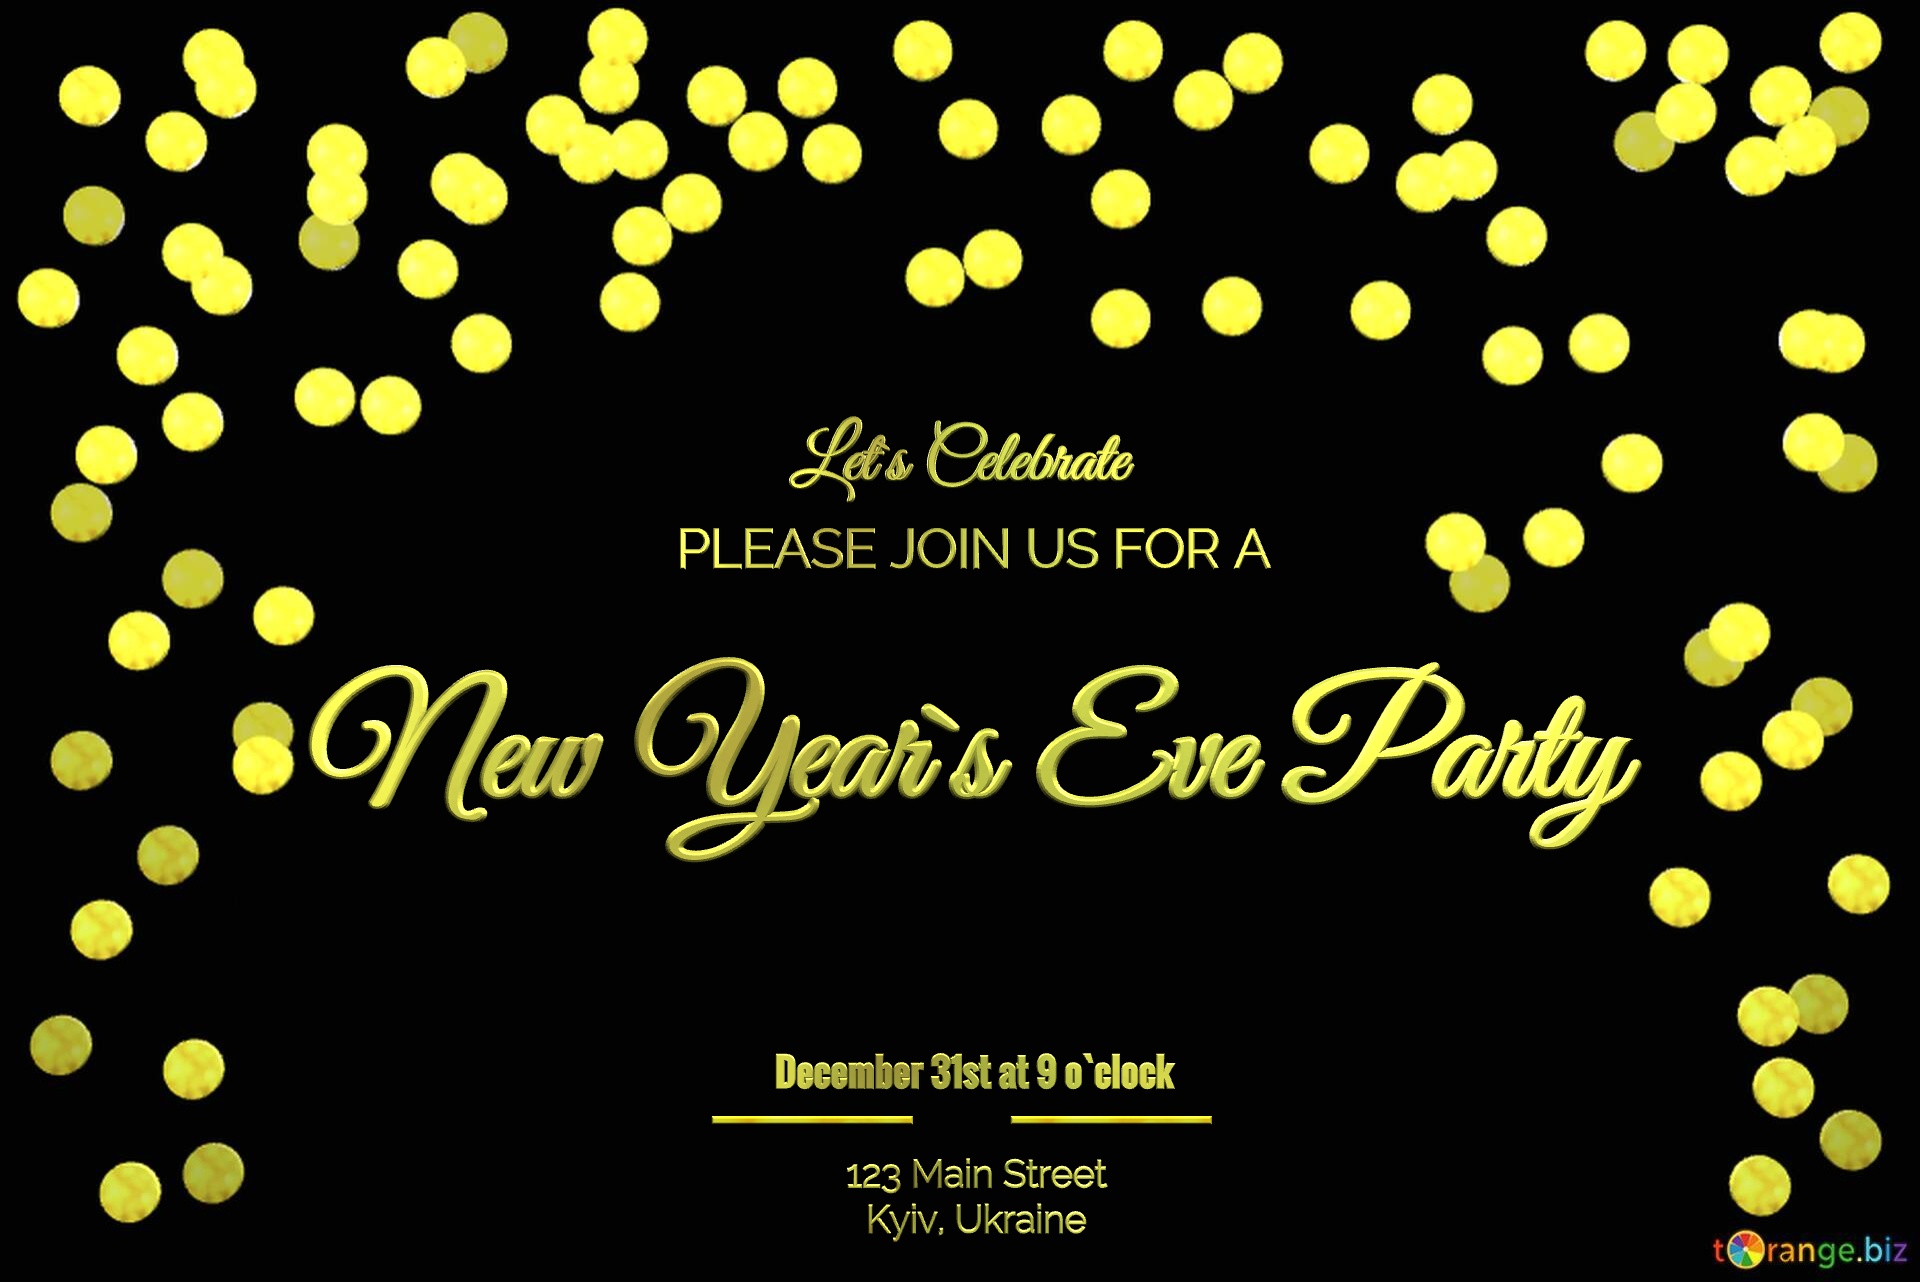 123 Main Street   Kyiv, Ukraine New Year`s Eve Party December 31st at 9 o`clock   PLEASE JOIN US FOR A Let`s Celebrate  christmas lights frame background №56397